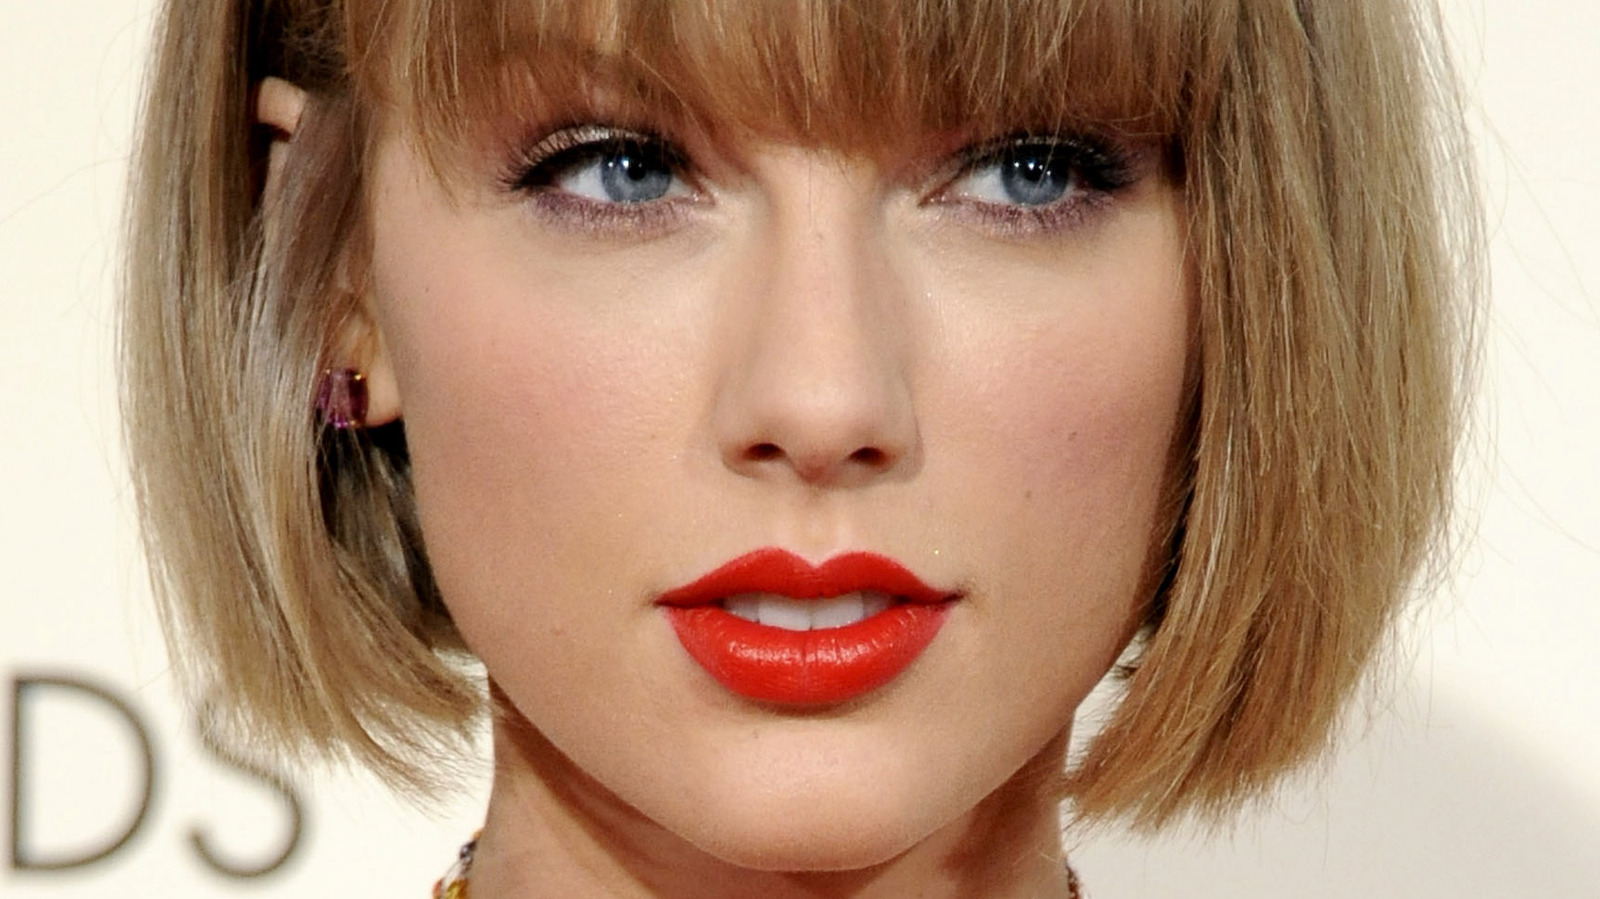 Taylor Swift Slams Famous Musician for Claiming She Didn’t Create Her Own Songs